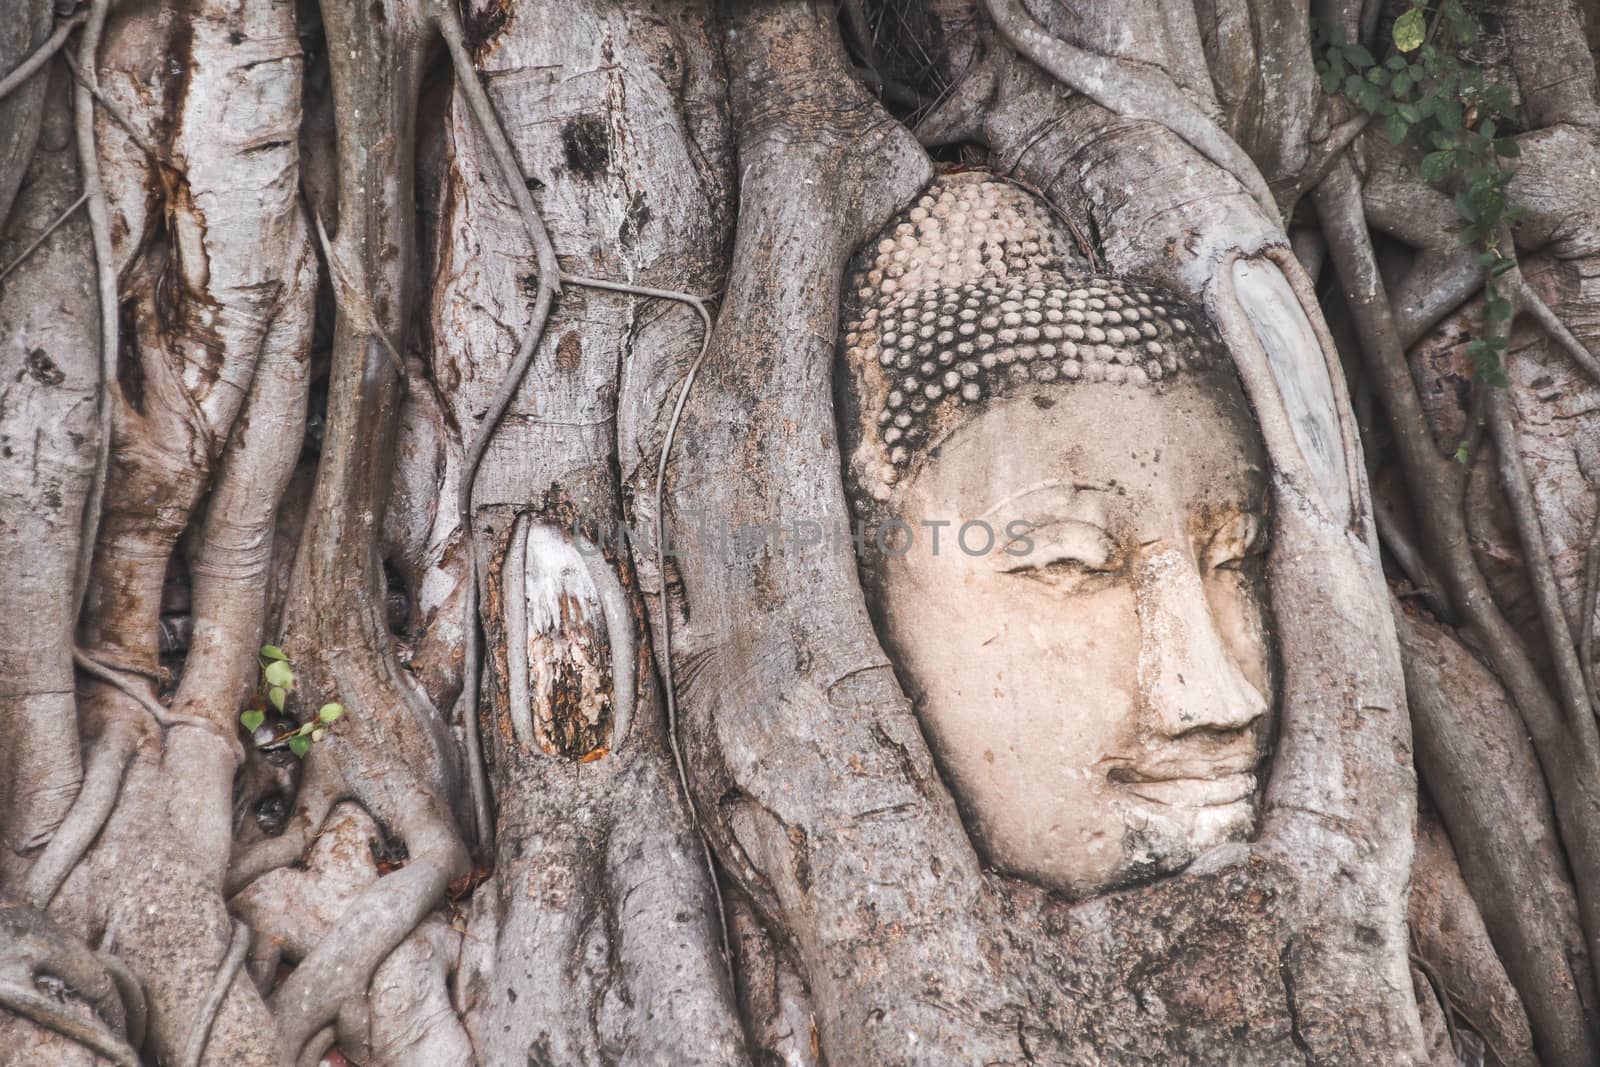 Buddha Head statue trapped in Bodhi Tree roots